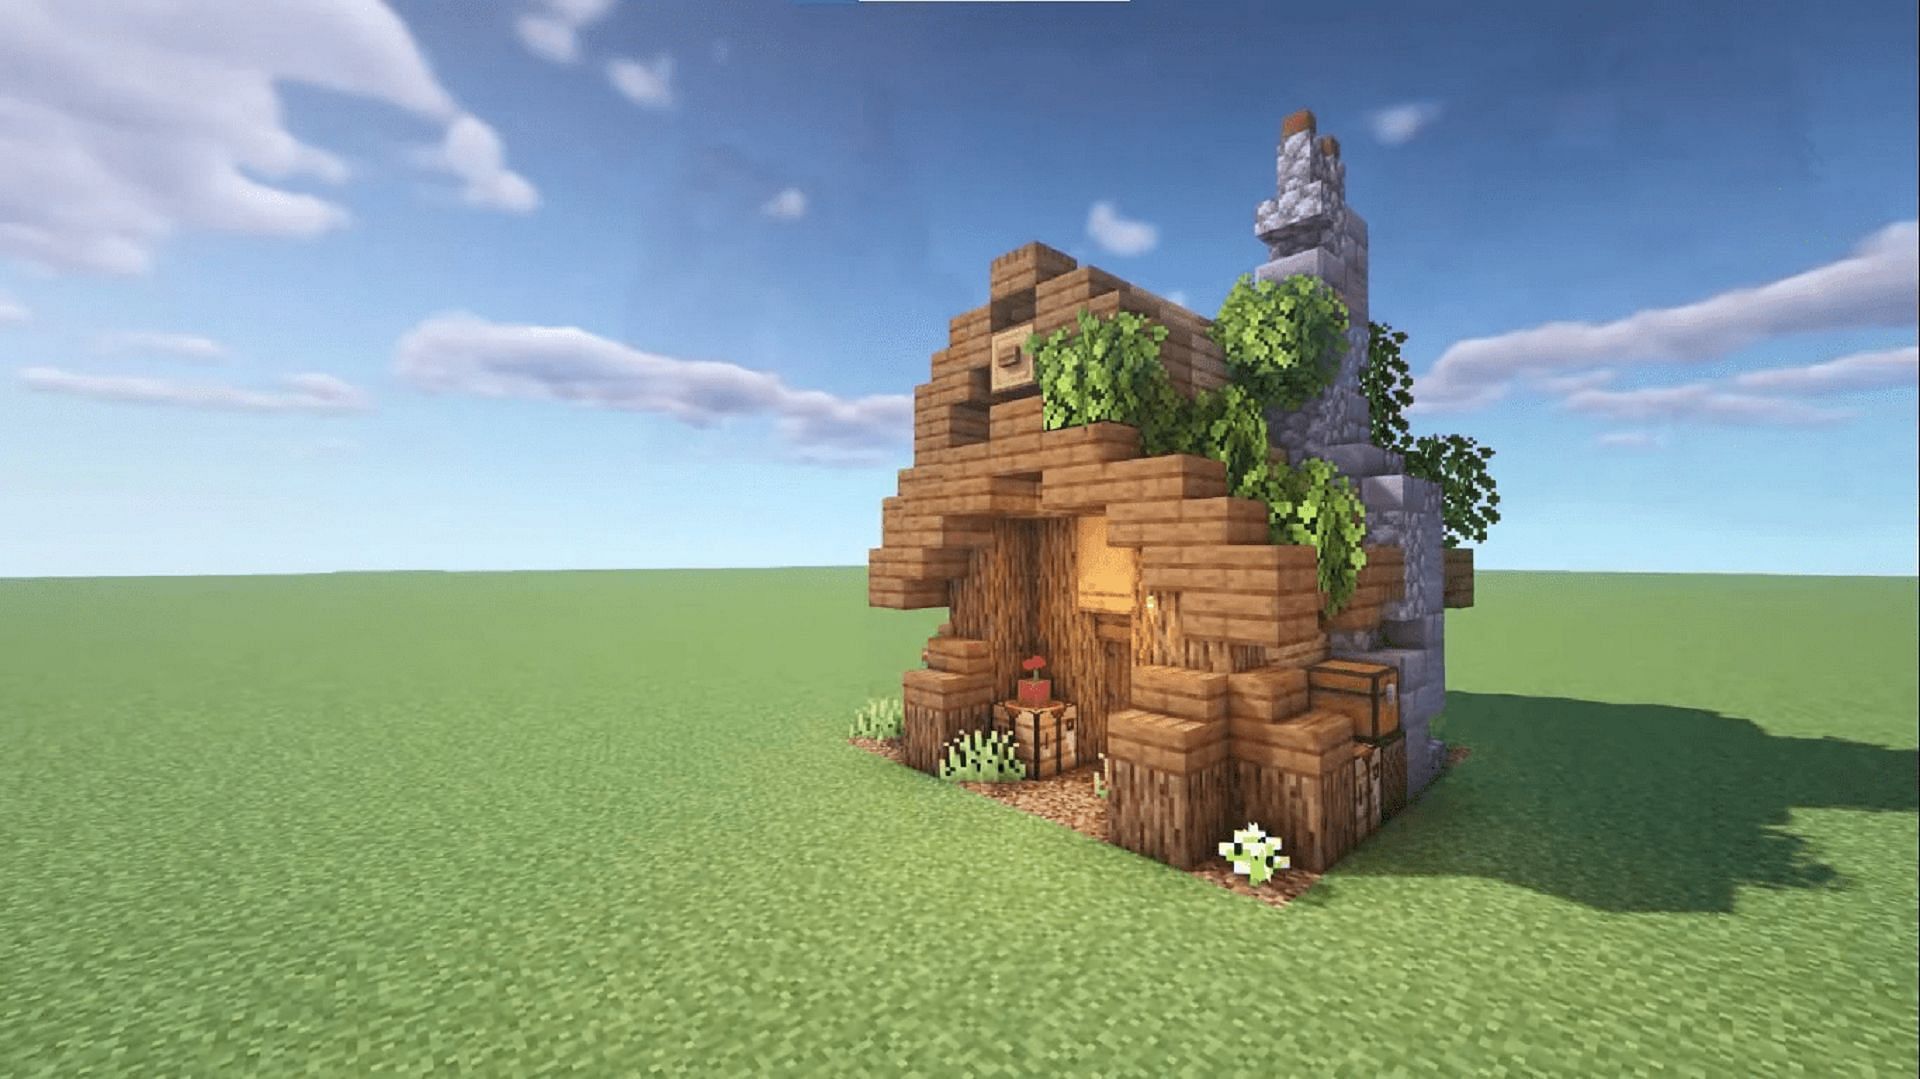 This house is compact while still looking great (Image via TheMythicalSausage/YouTube)